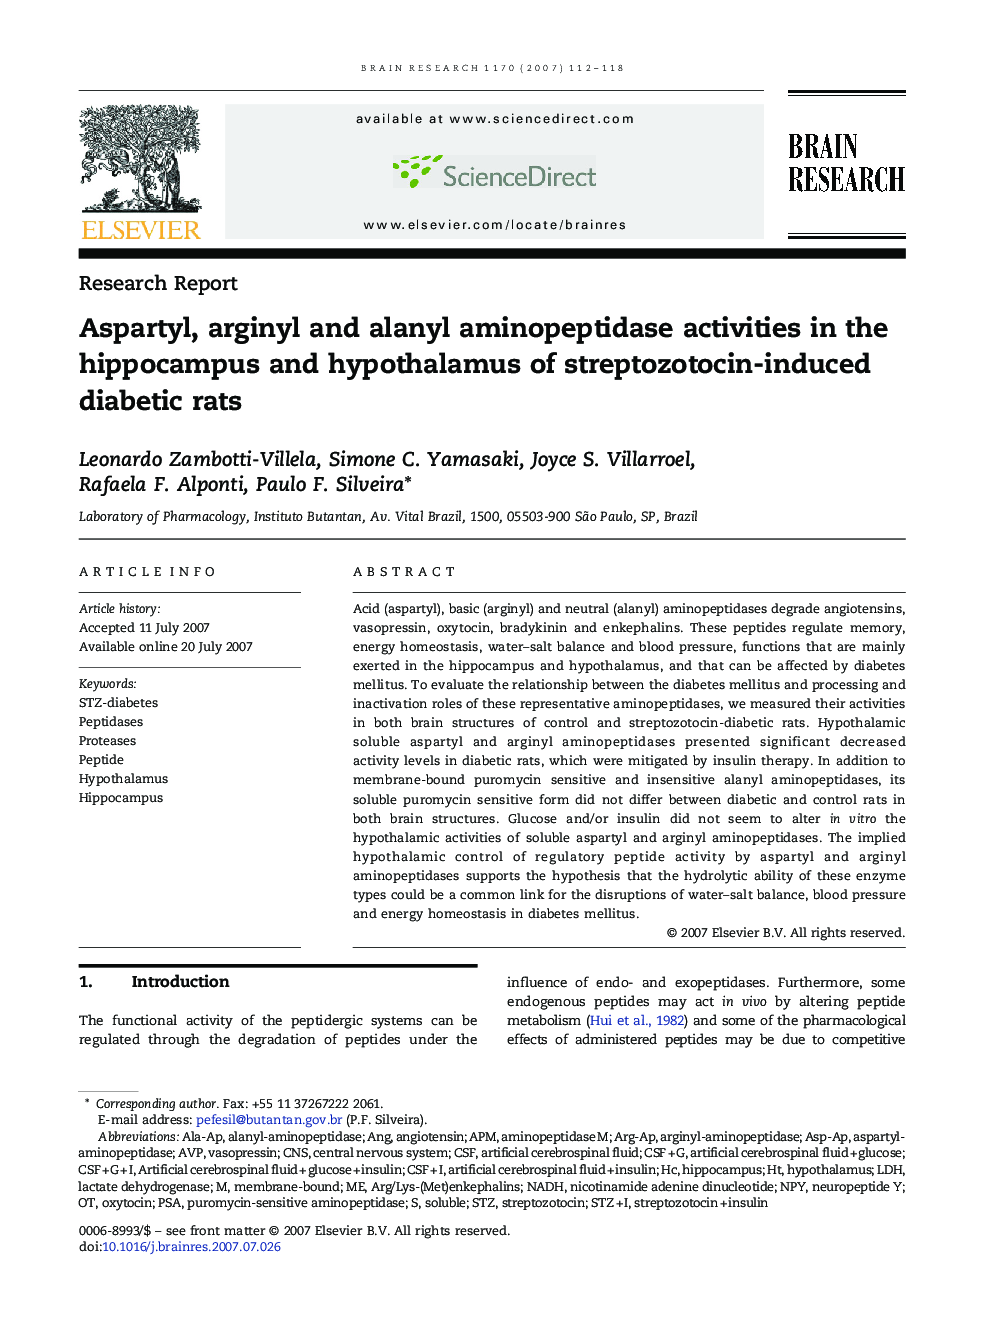 Aspartyl, arginyl and alanyl aminopeptidase activities in the hippocampus and hypothalamus of streptozotocin-induced diabetic rats